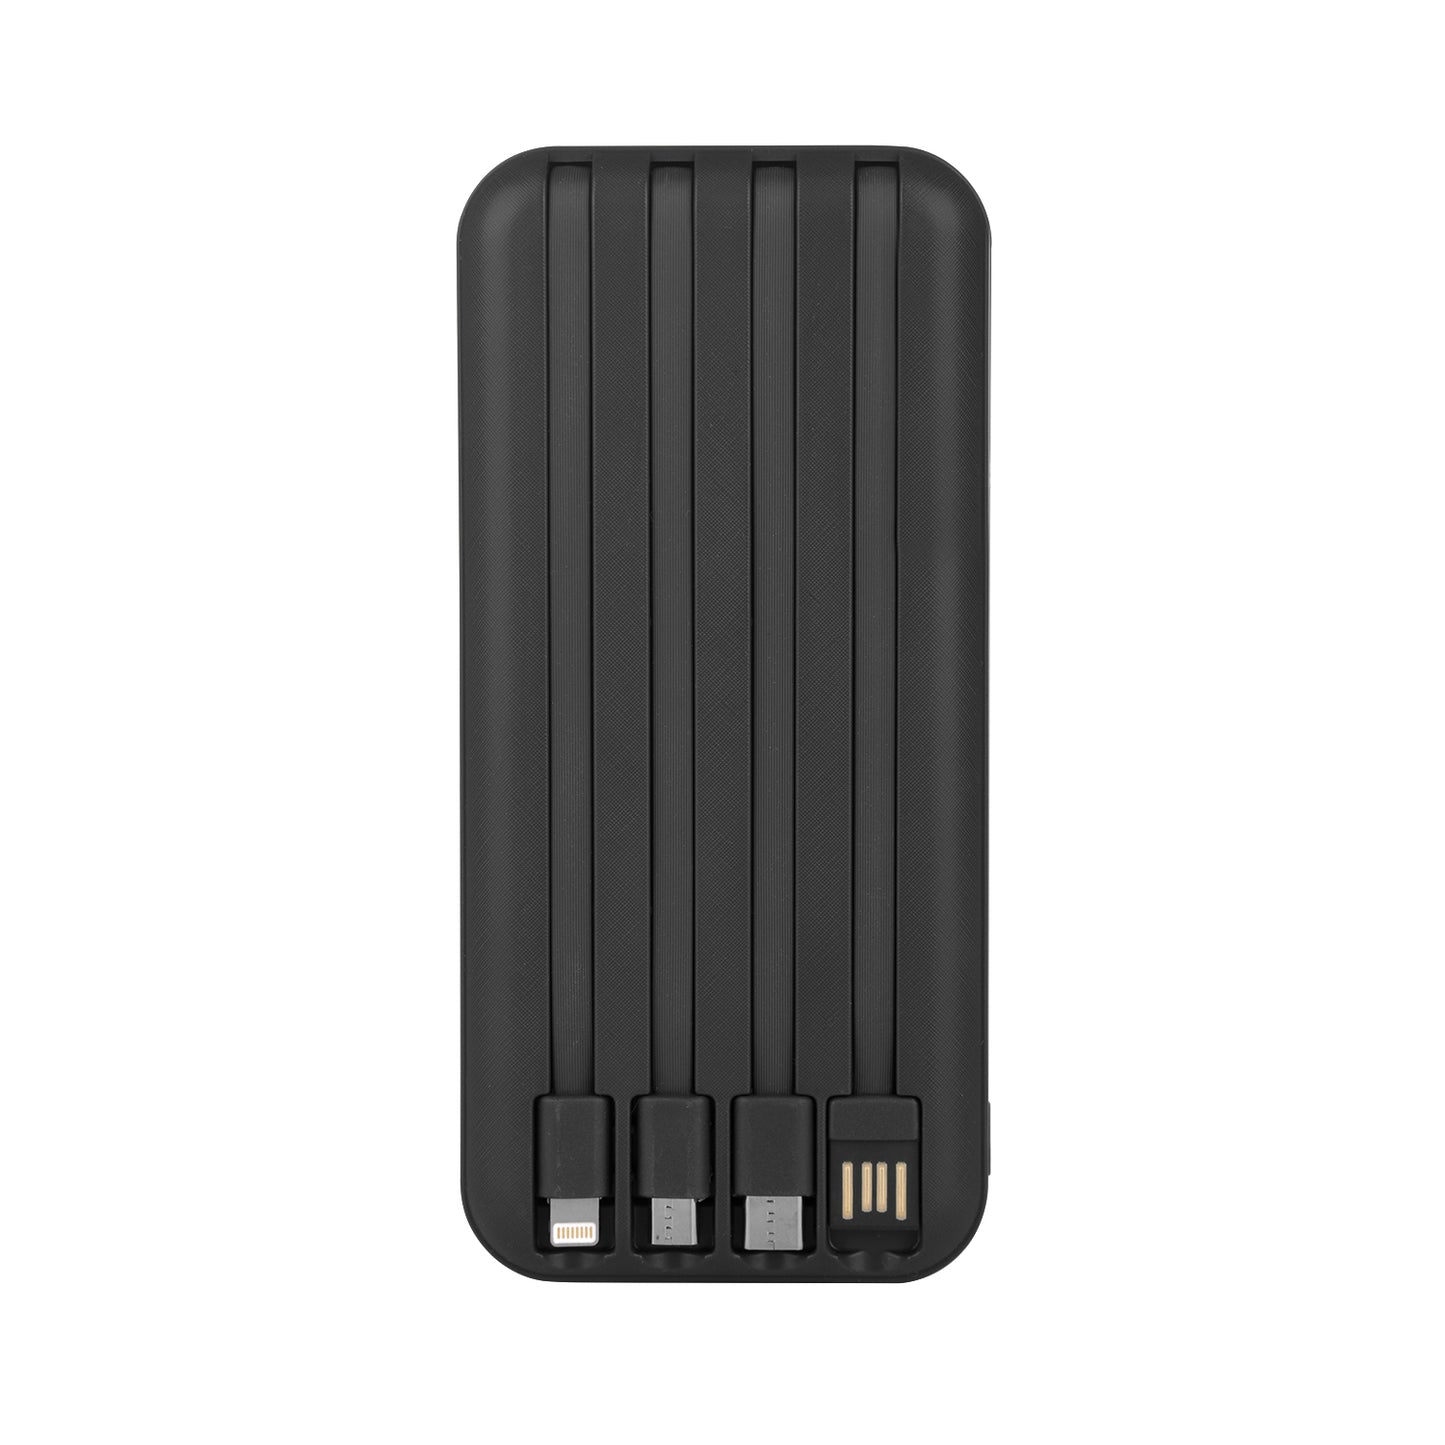 Personalized Black 10000mAh Power Bank - For Corporate Gifting, Event Gifting, Freebies, Promotions - EnWire HK10232